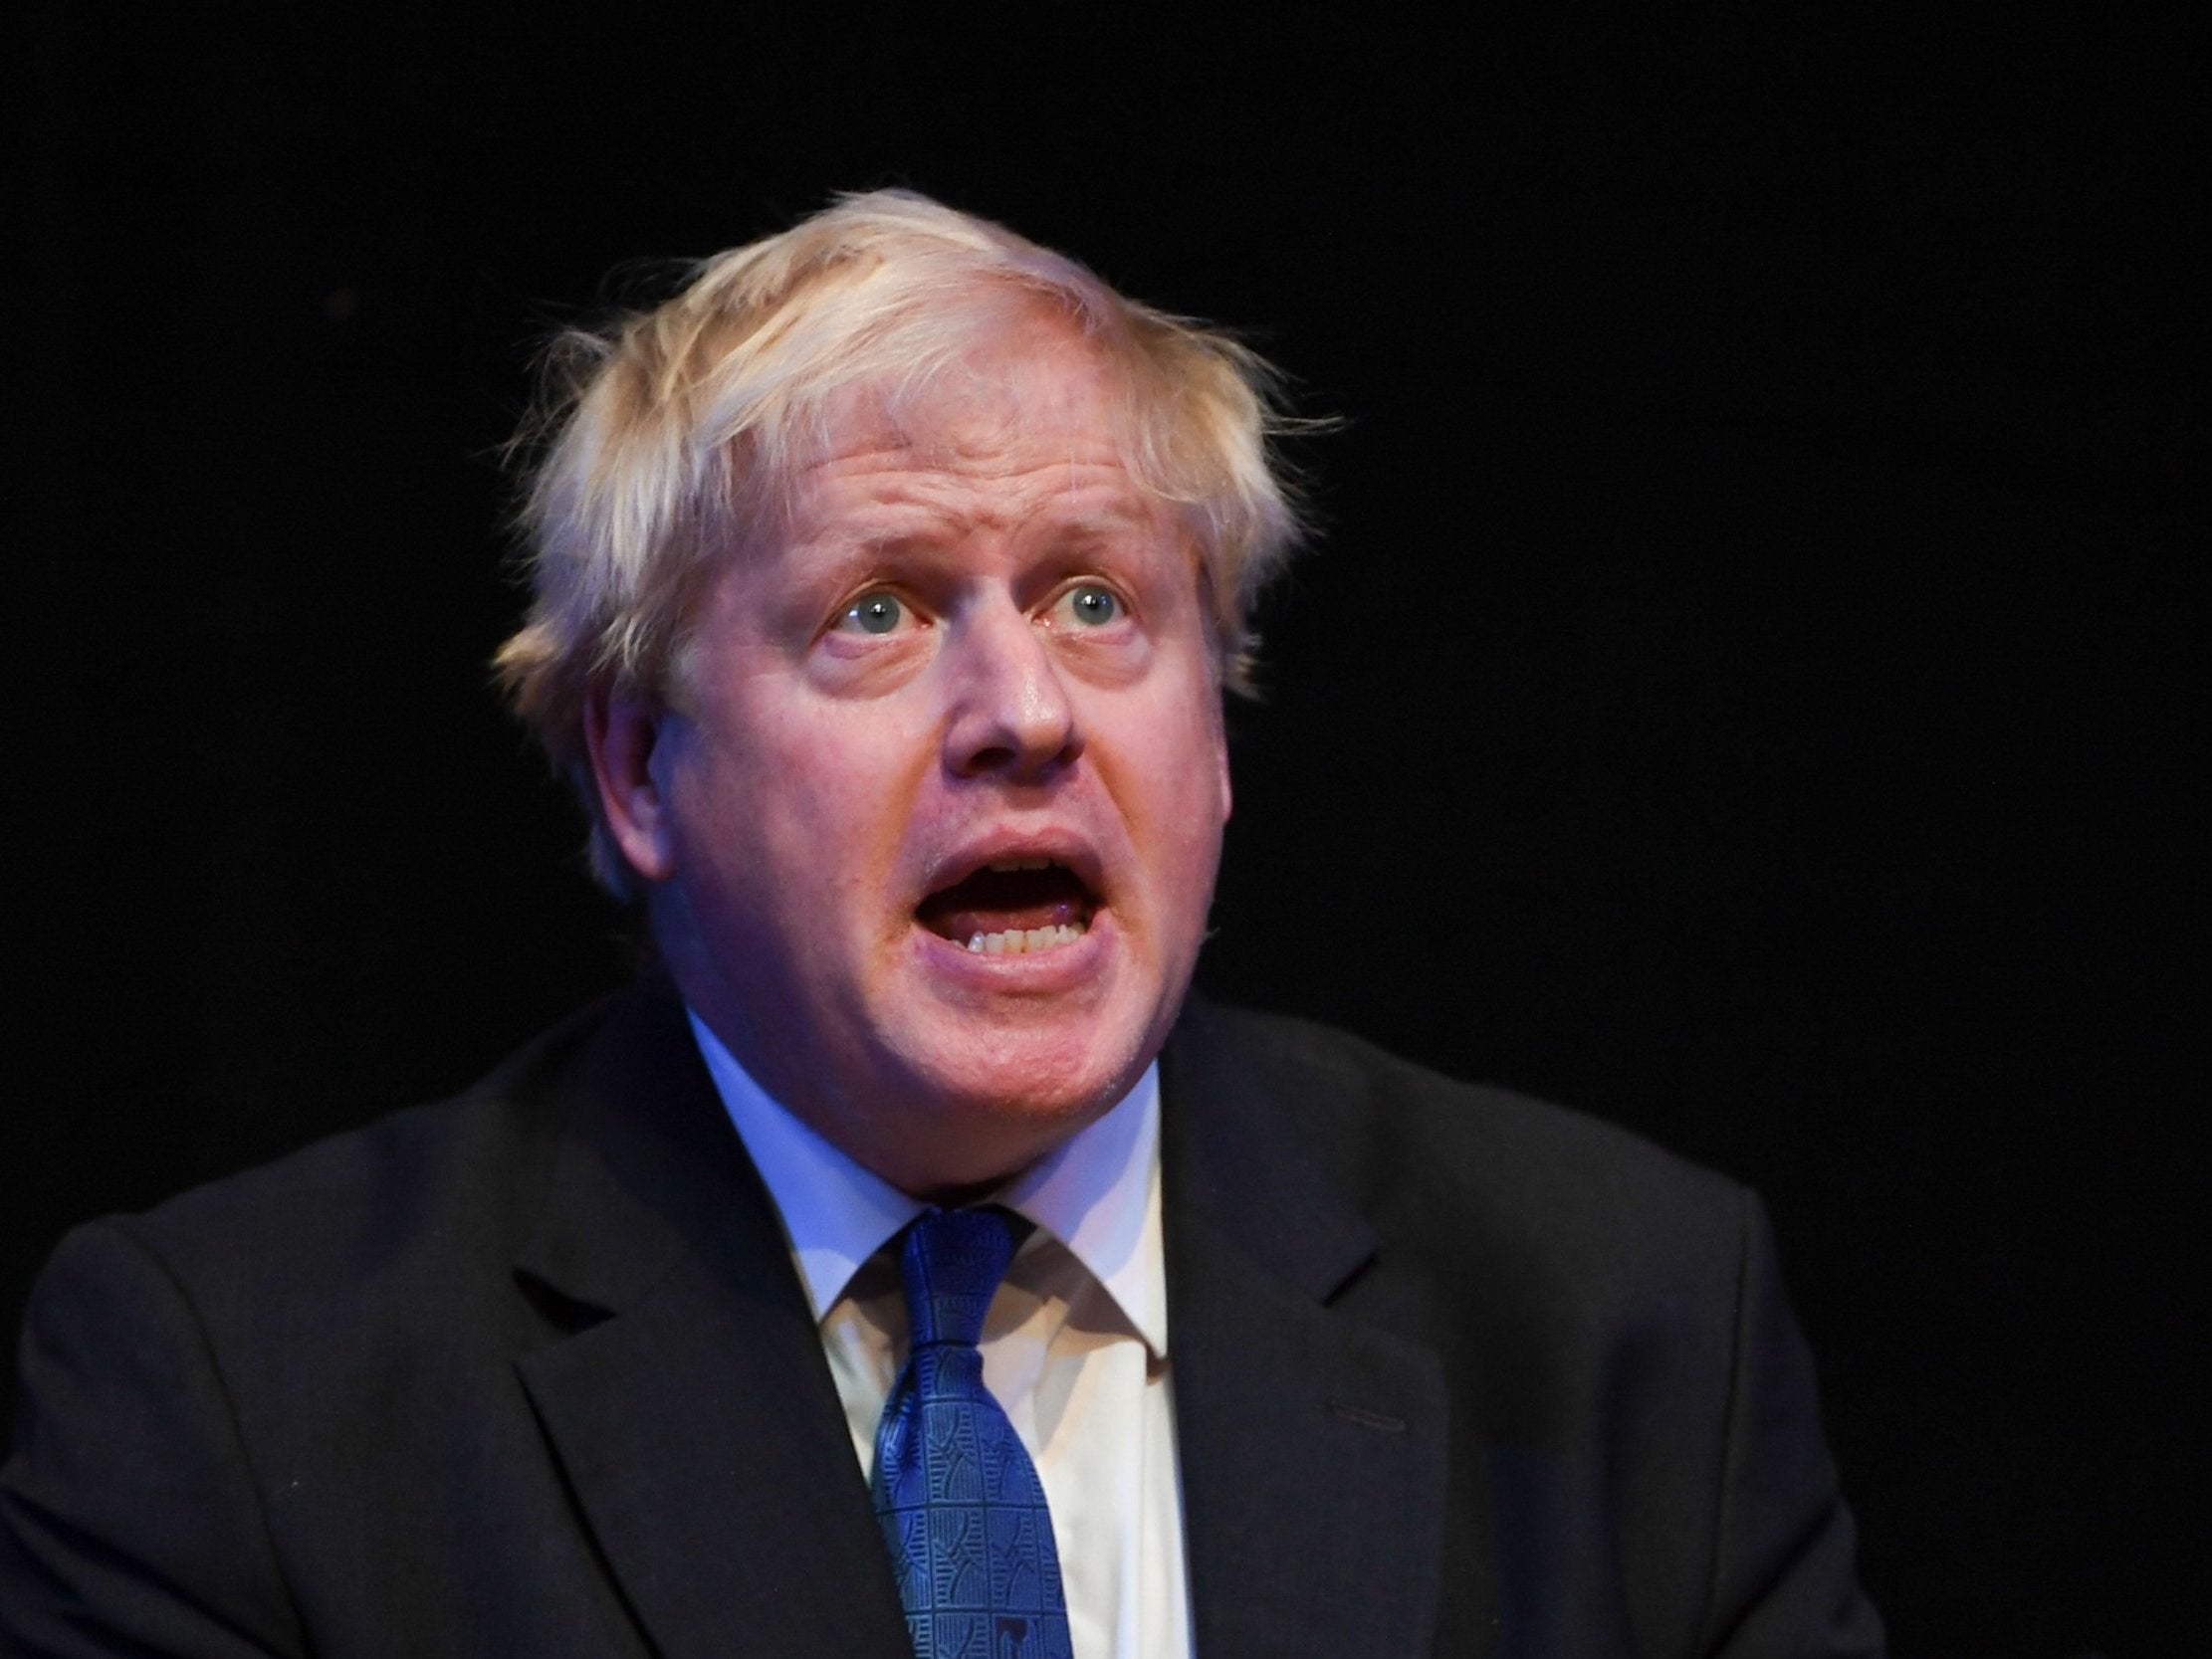 Johnson comes from a class of people for whom politics is just a game; a debate; a stage on which to strut